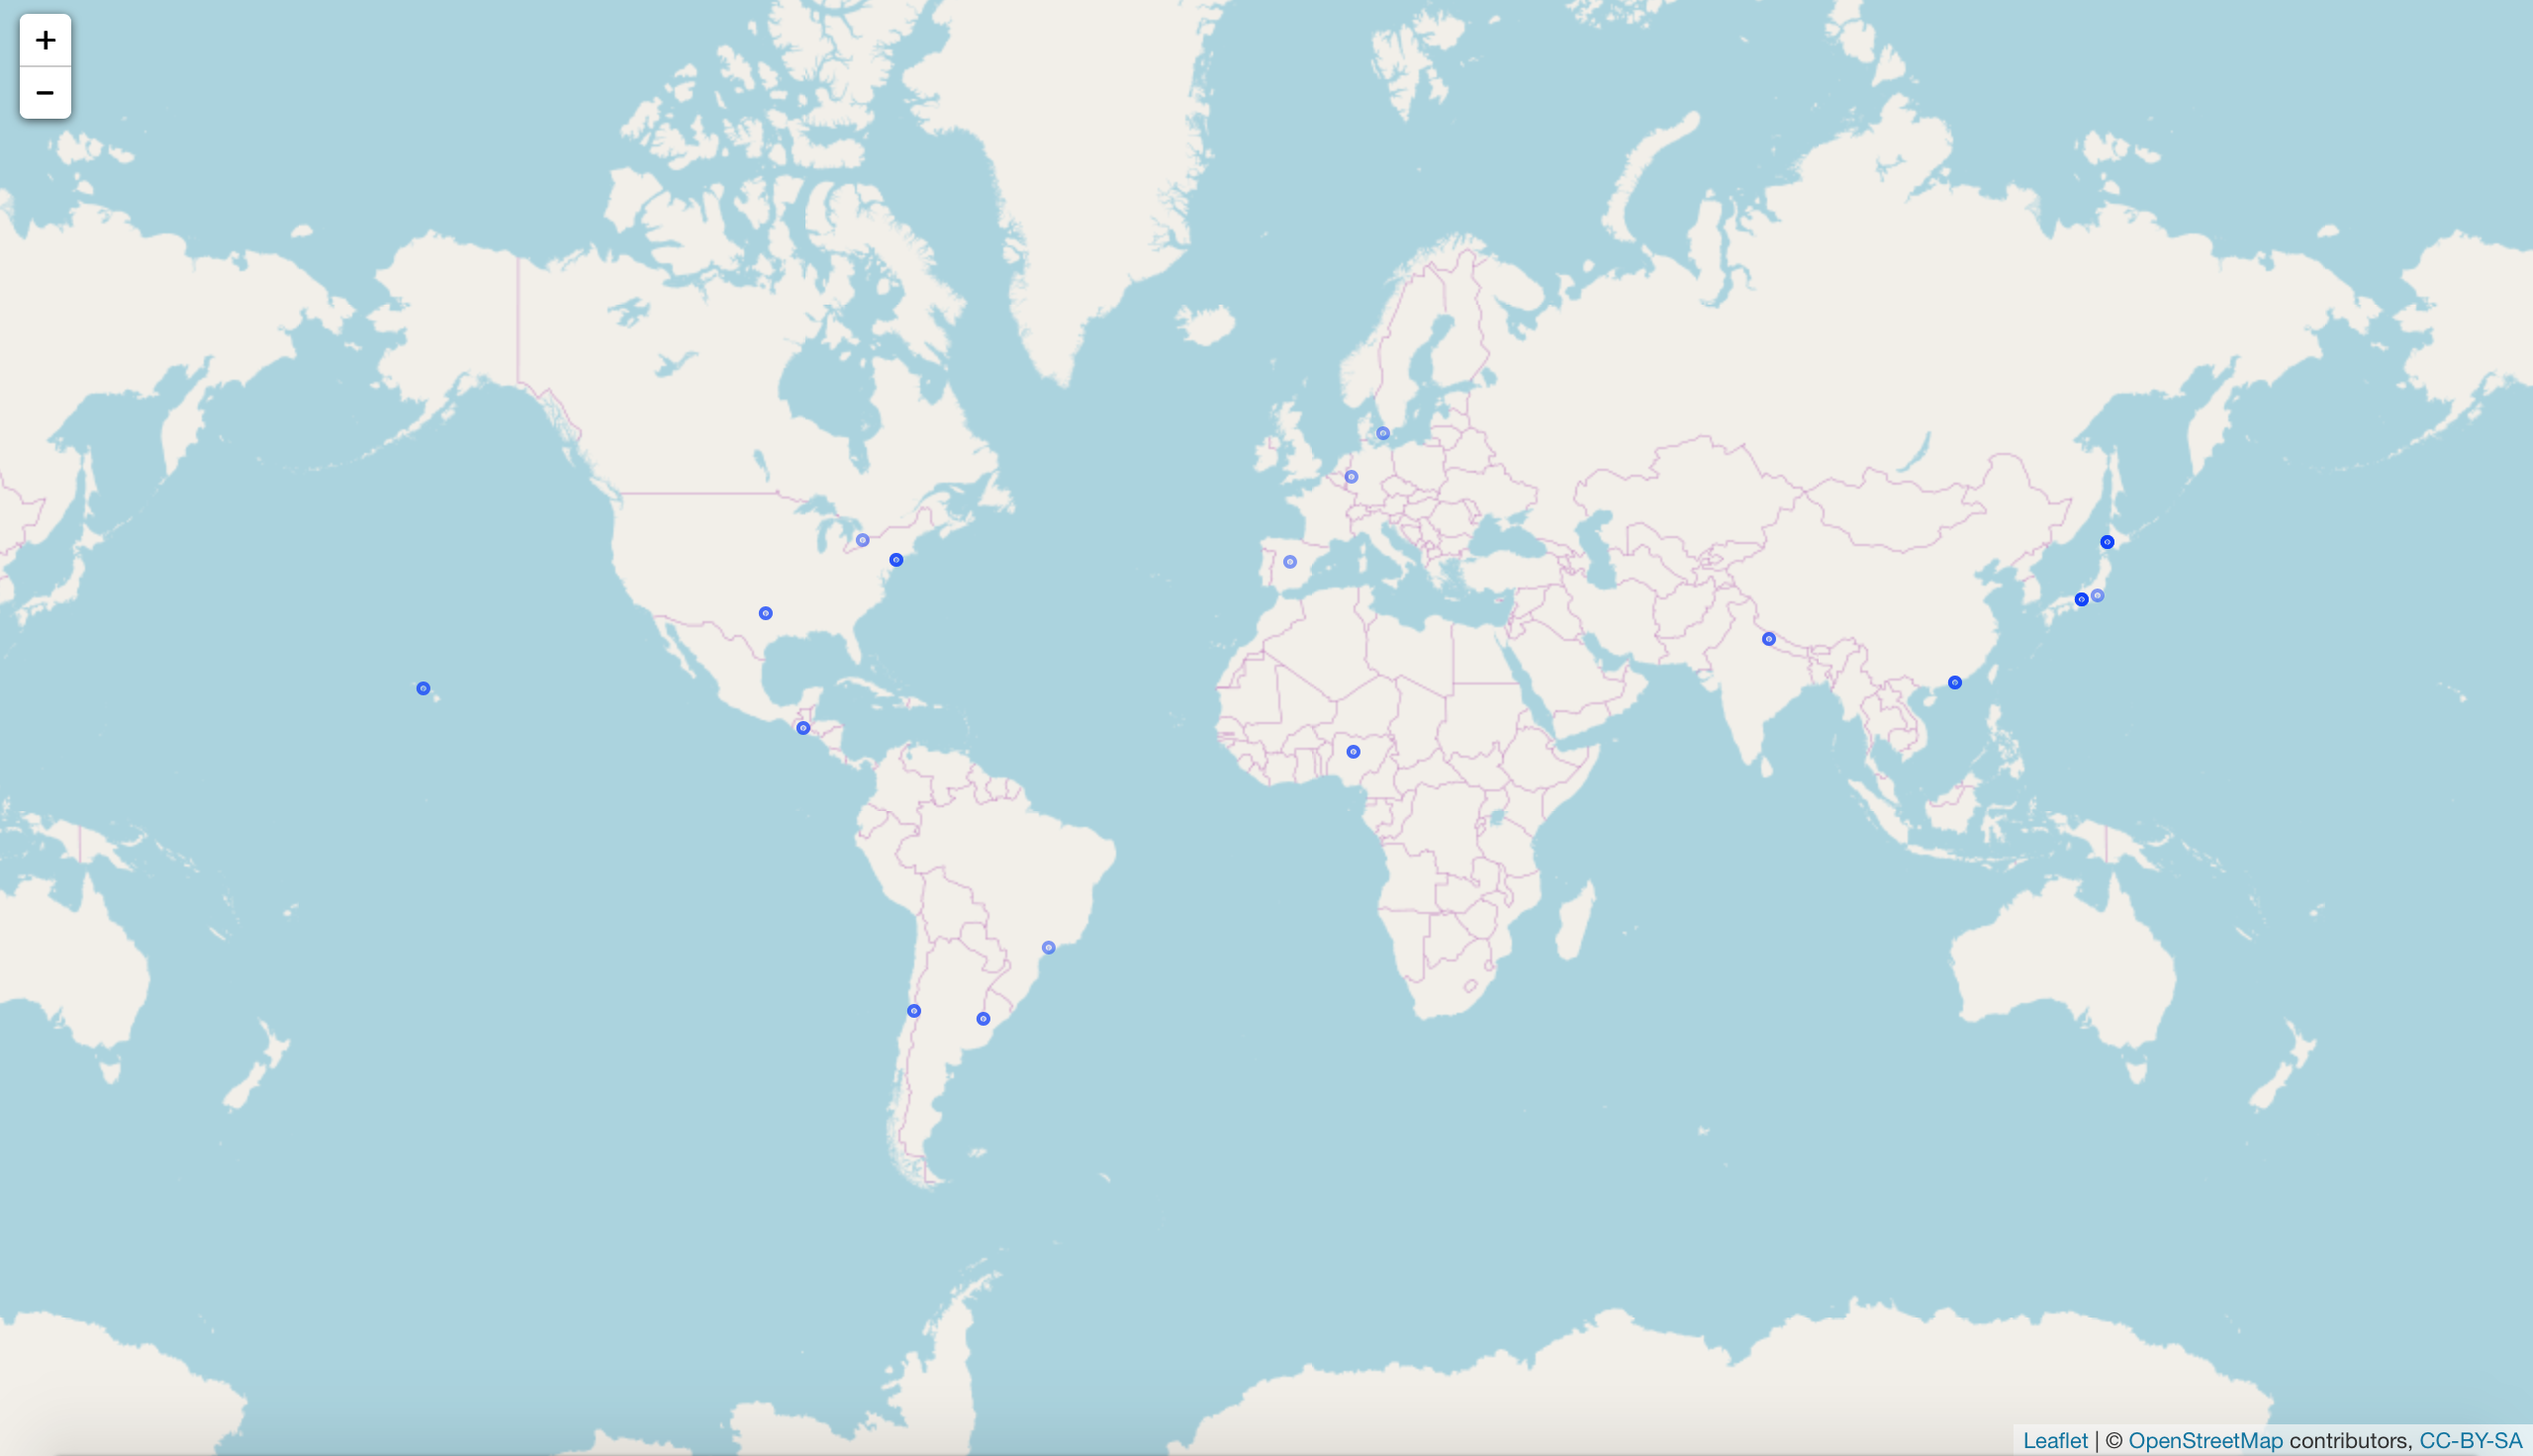 map showing where geotagged #opendataday and #odd18 tweets originated from